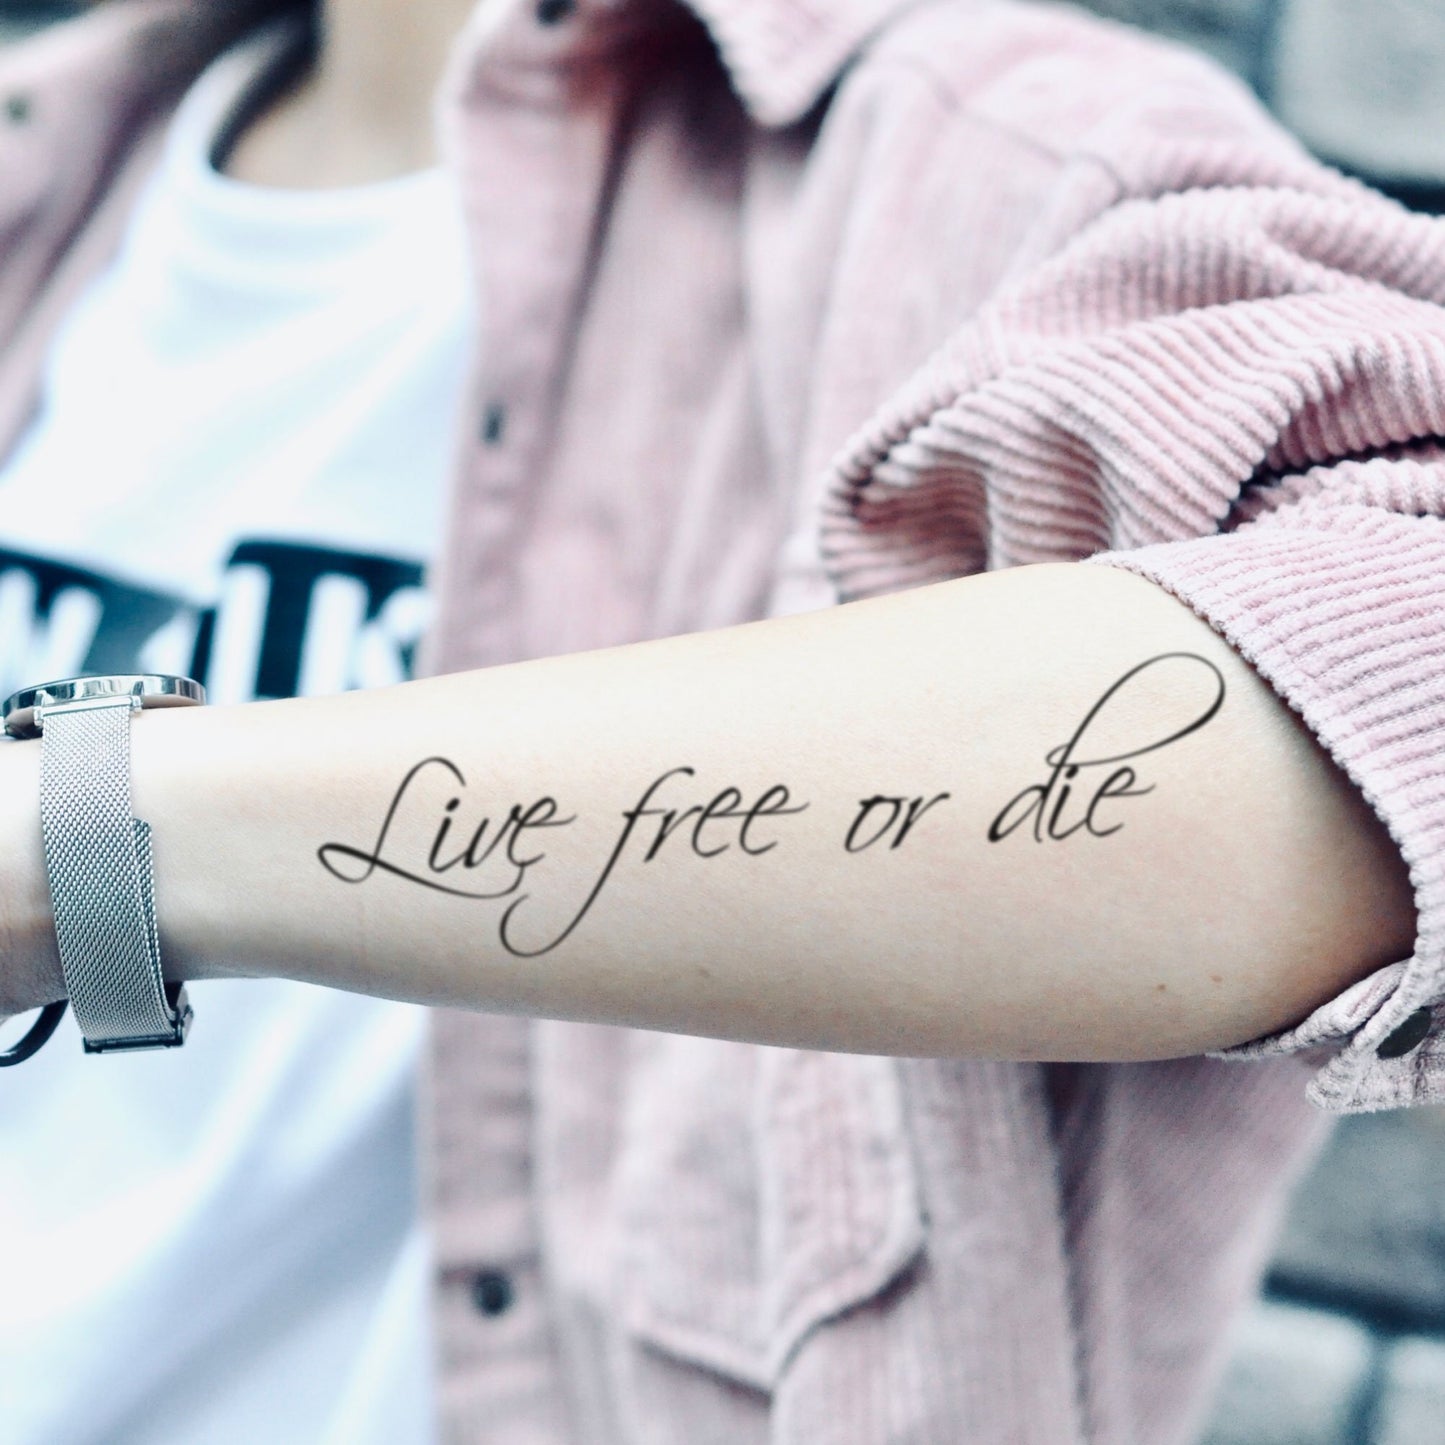 fake medium live free or die lower arm lettering temporary tattoo sticker design idea on forearm